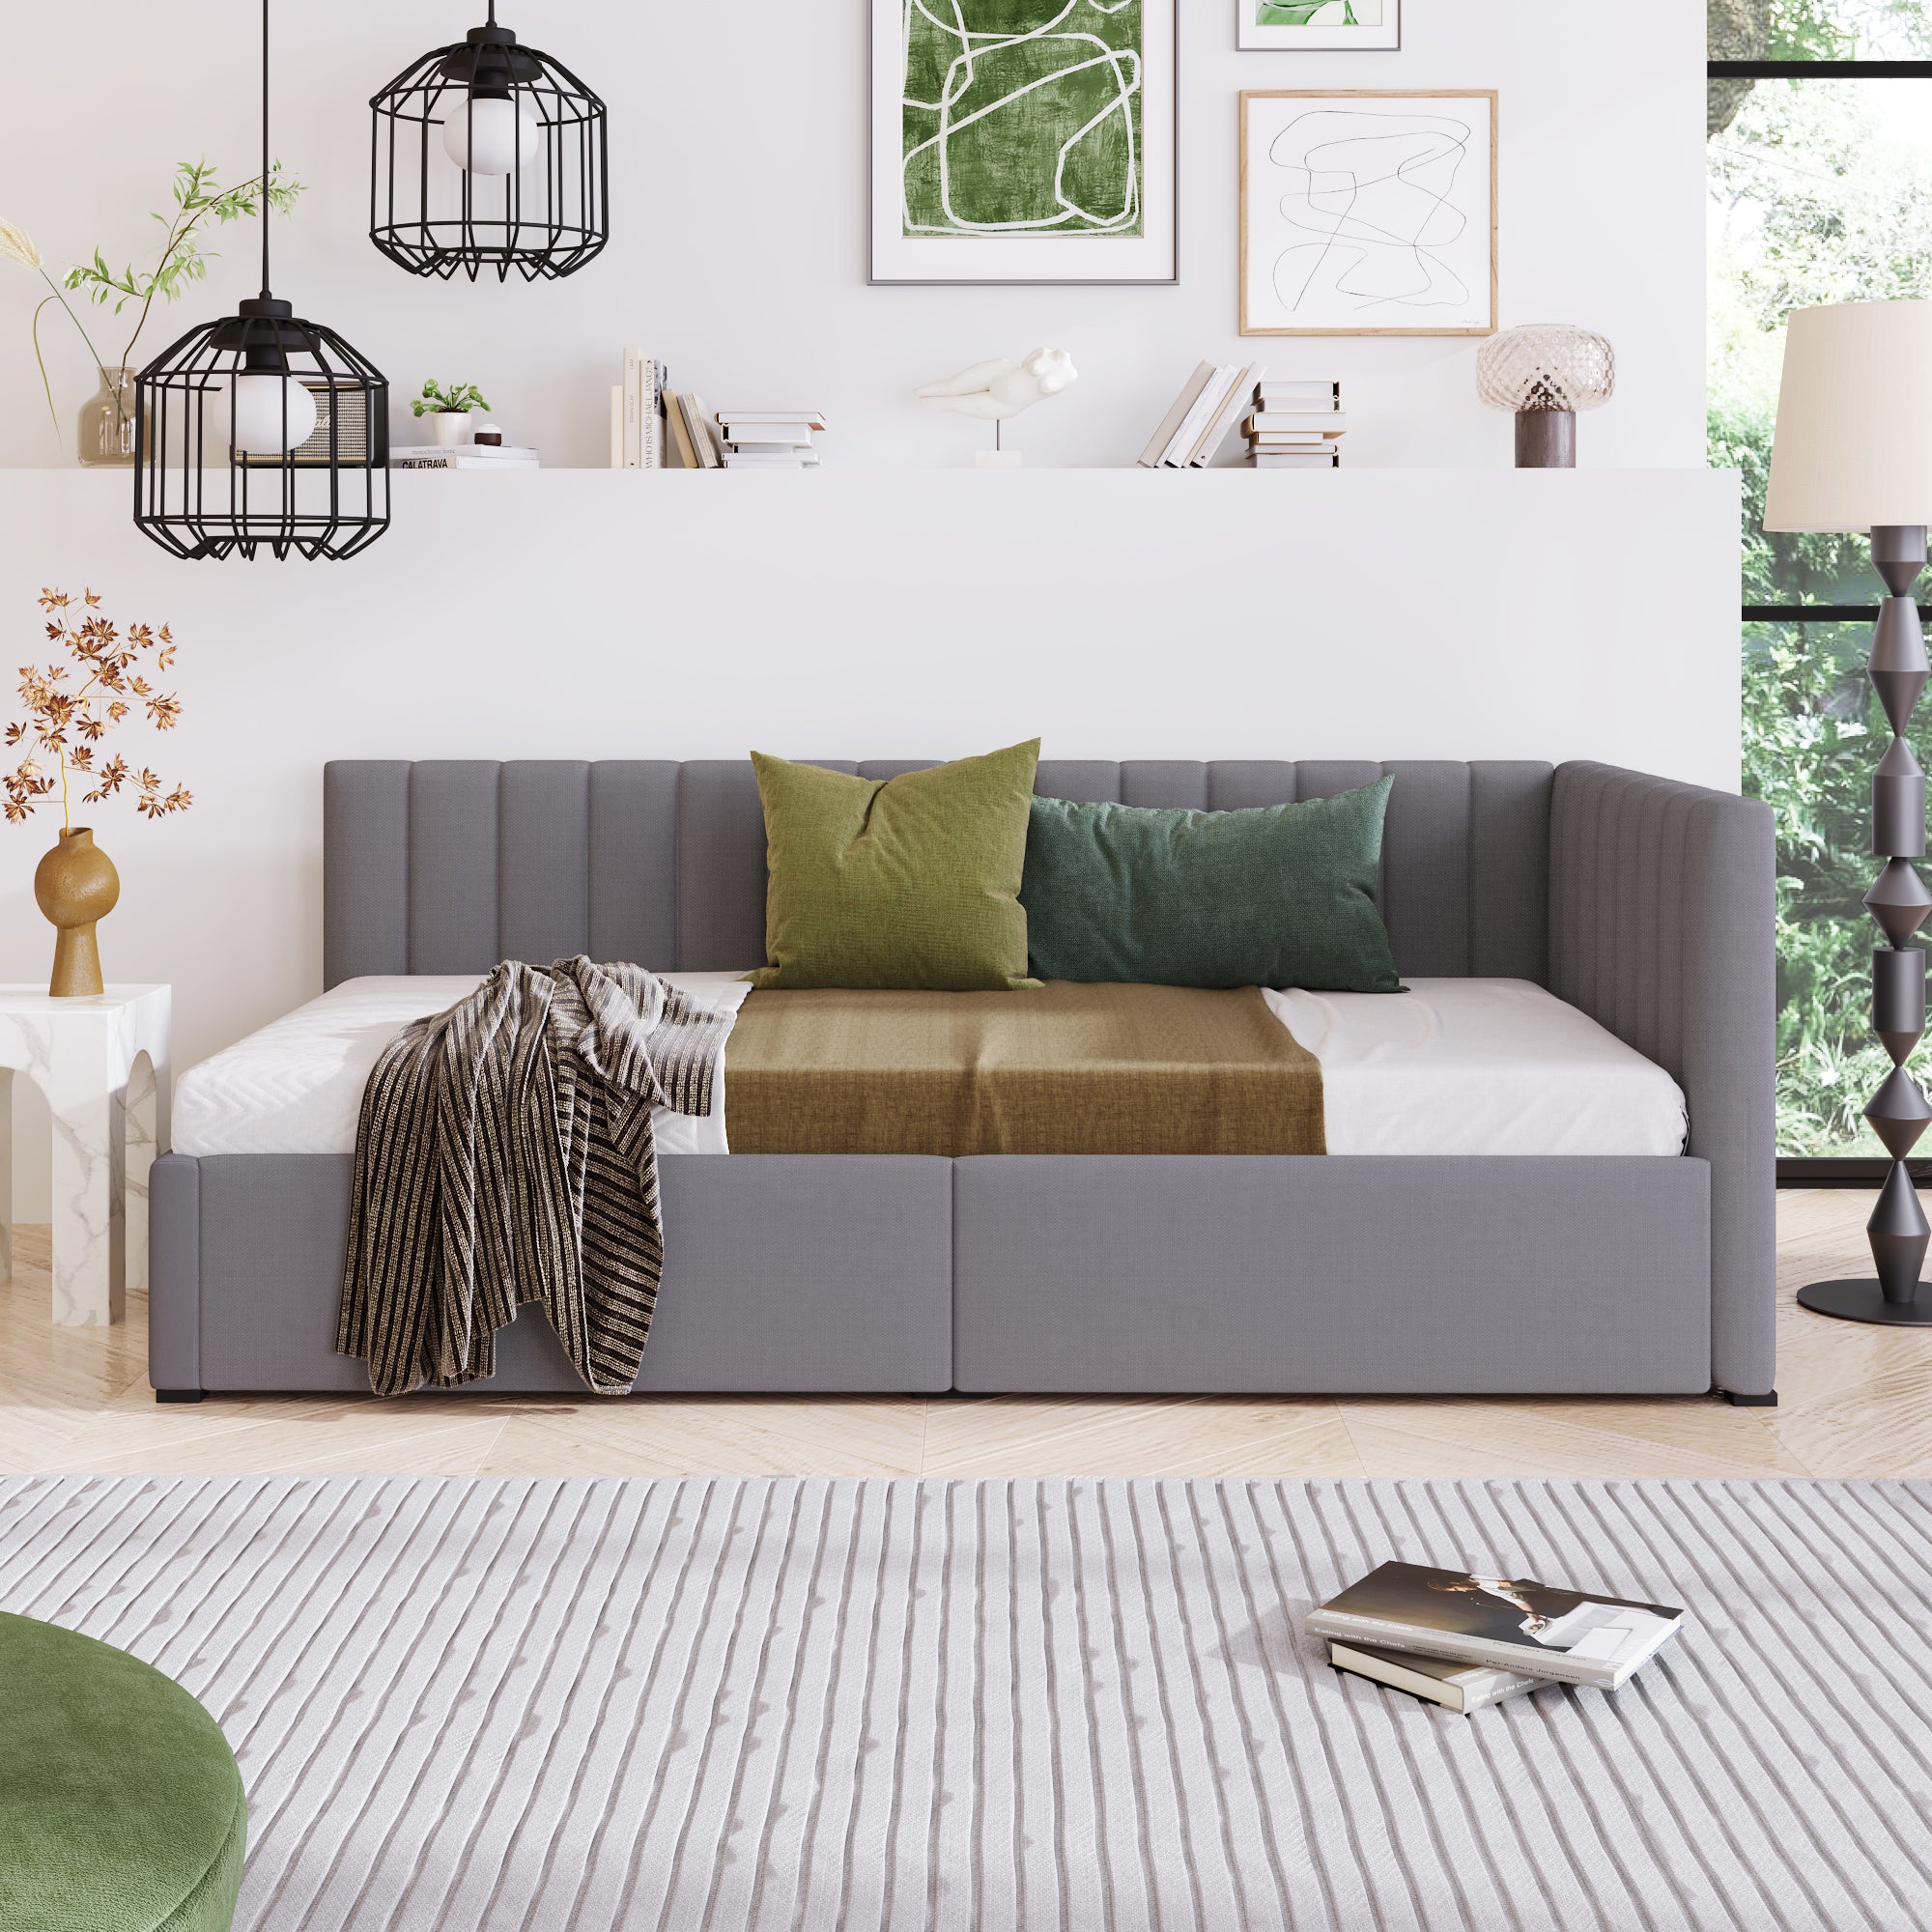 Upholstered Daybed with 2 Storage Drawers Twin Size gray-upholstered